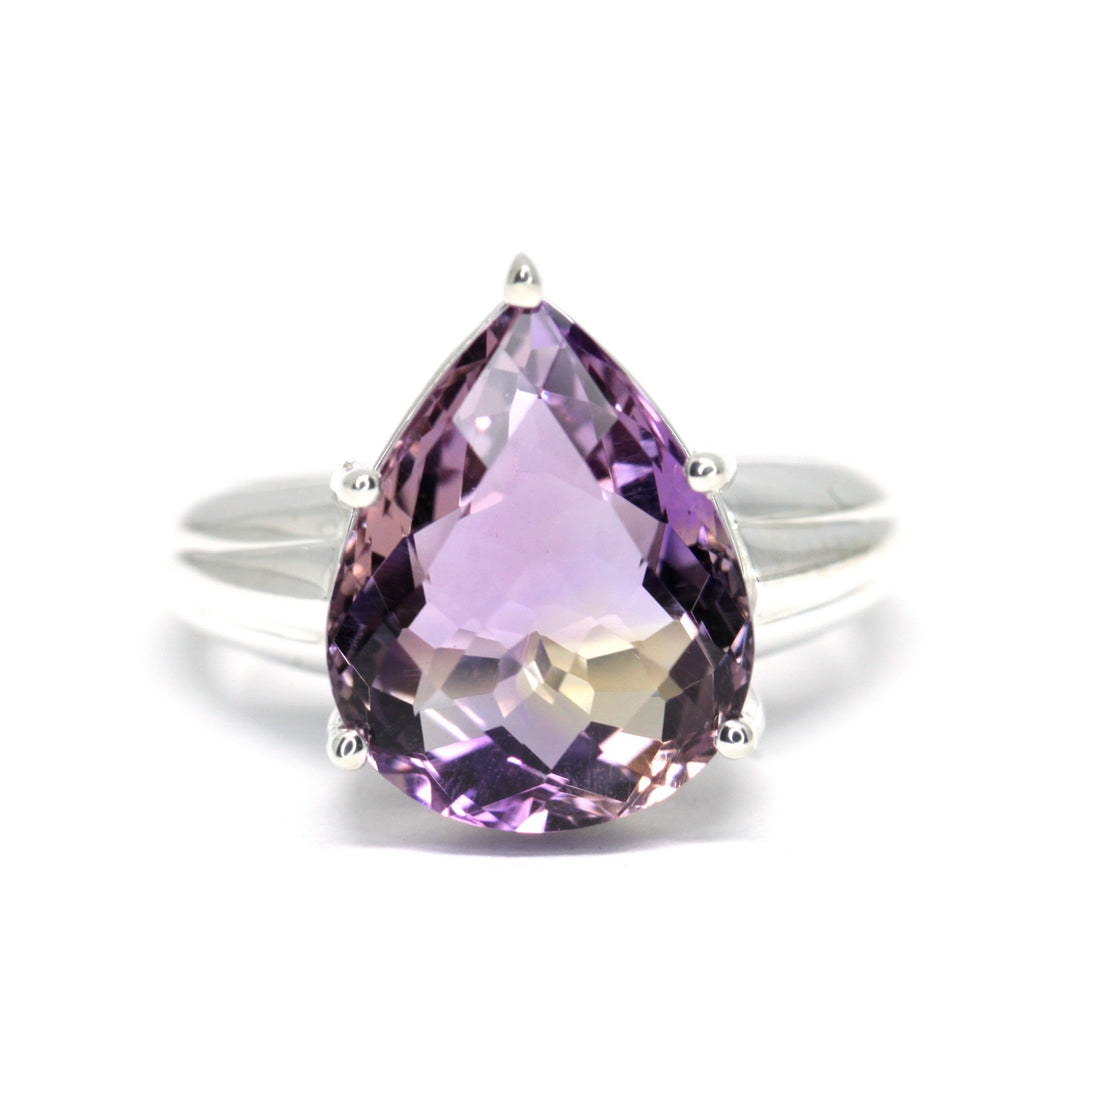 Ametrine cocktail ring bena jewelry fancy edgy fine jewelry made in montreal fine jewelry designer natural cocktail gemstone ring specialist large pear silver ring quartz gems